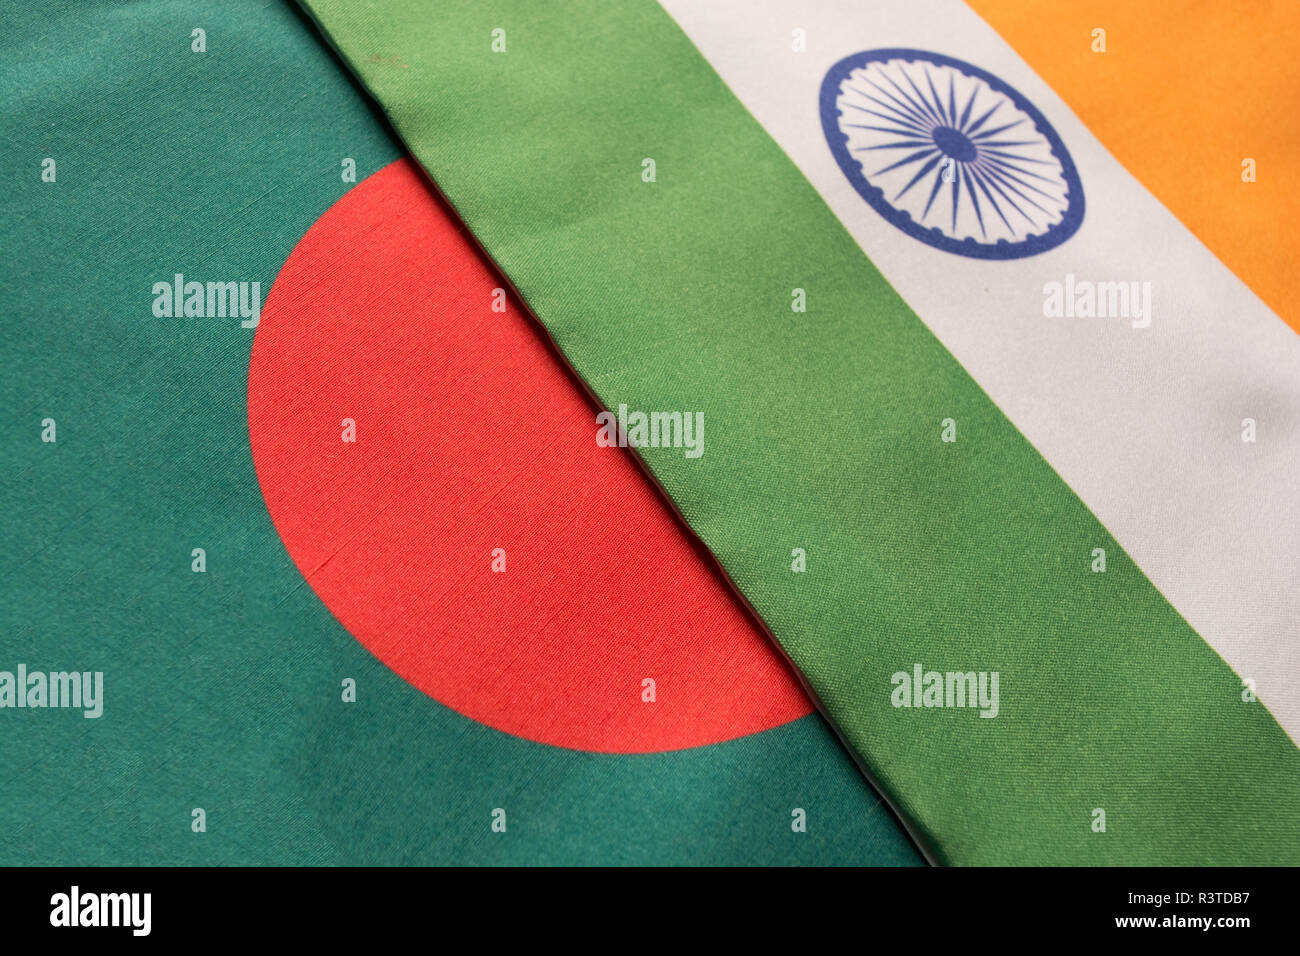 Bangladesh and Indian flags placed on table Stock Photo